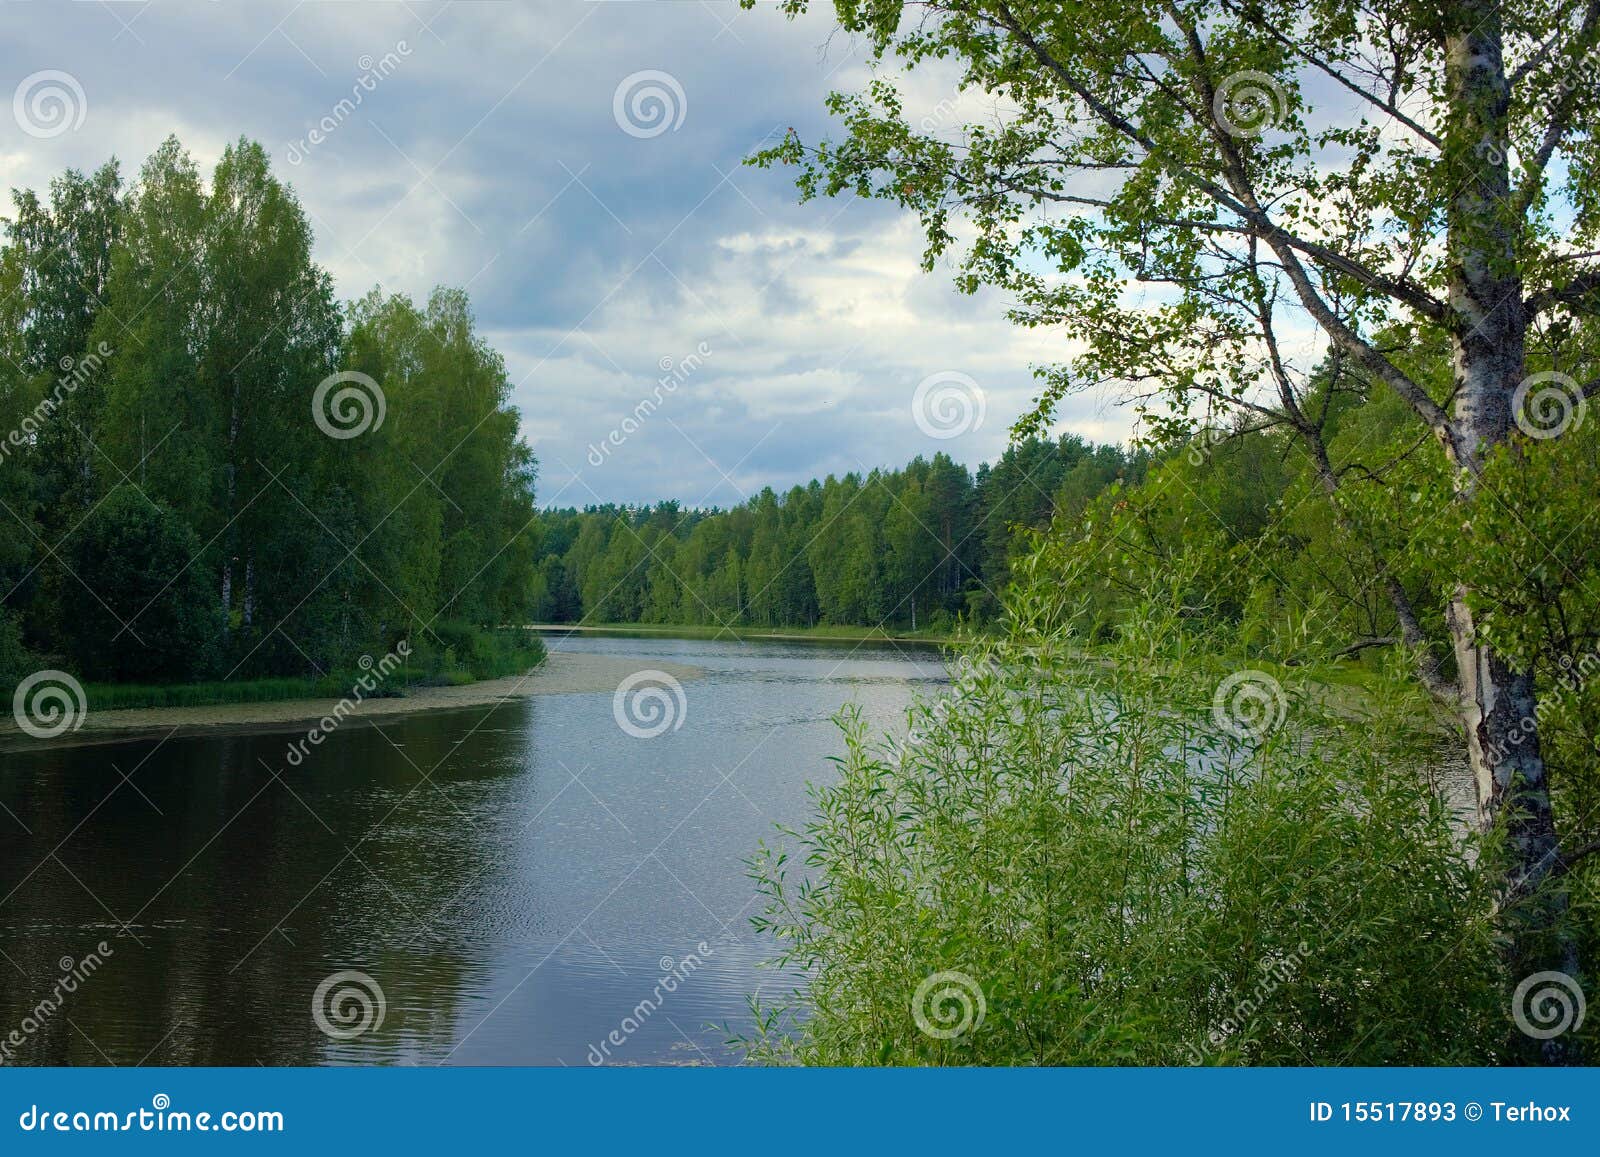 scenic forest and river